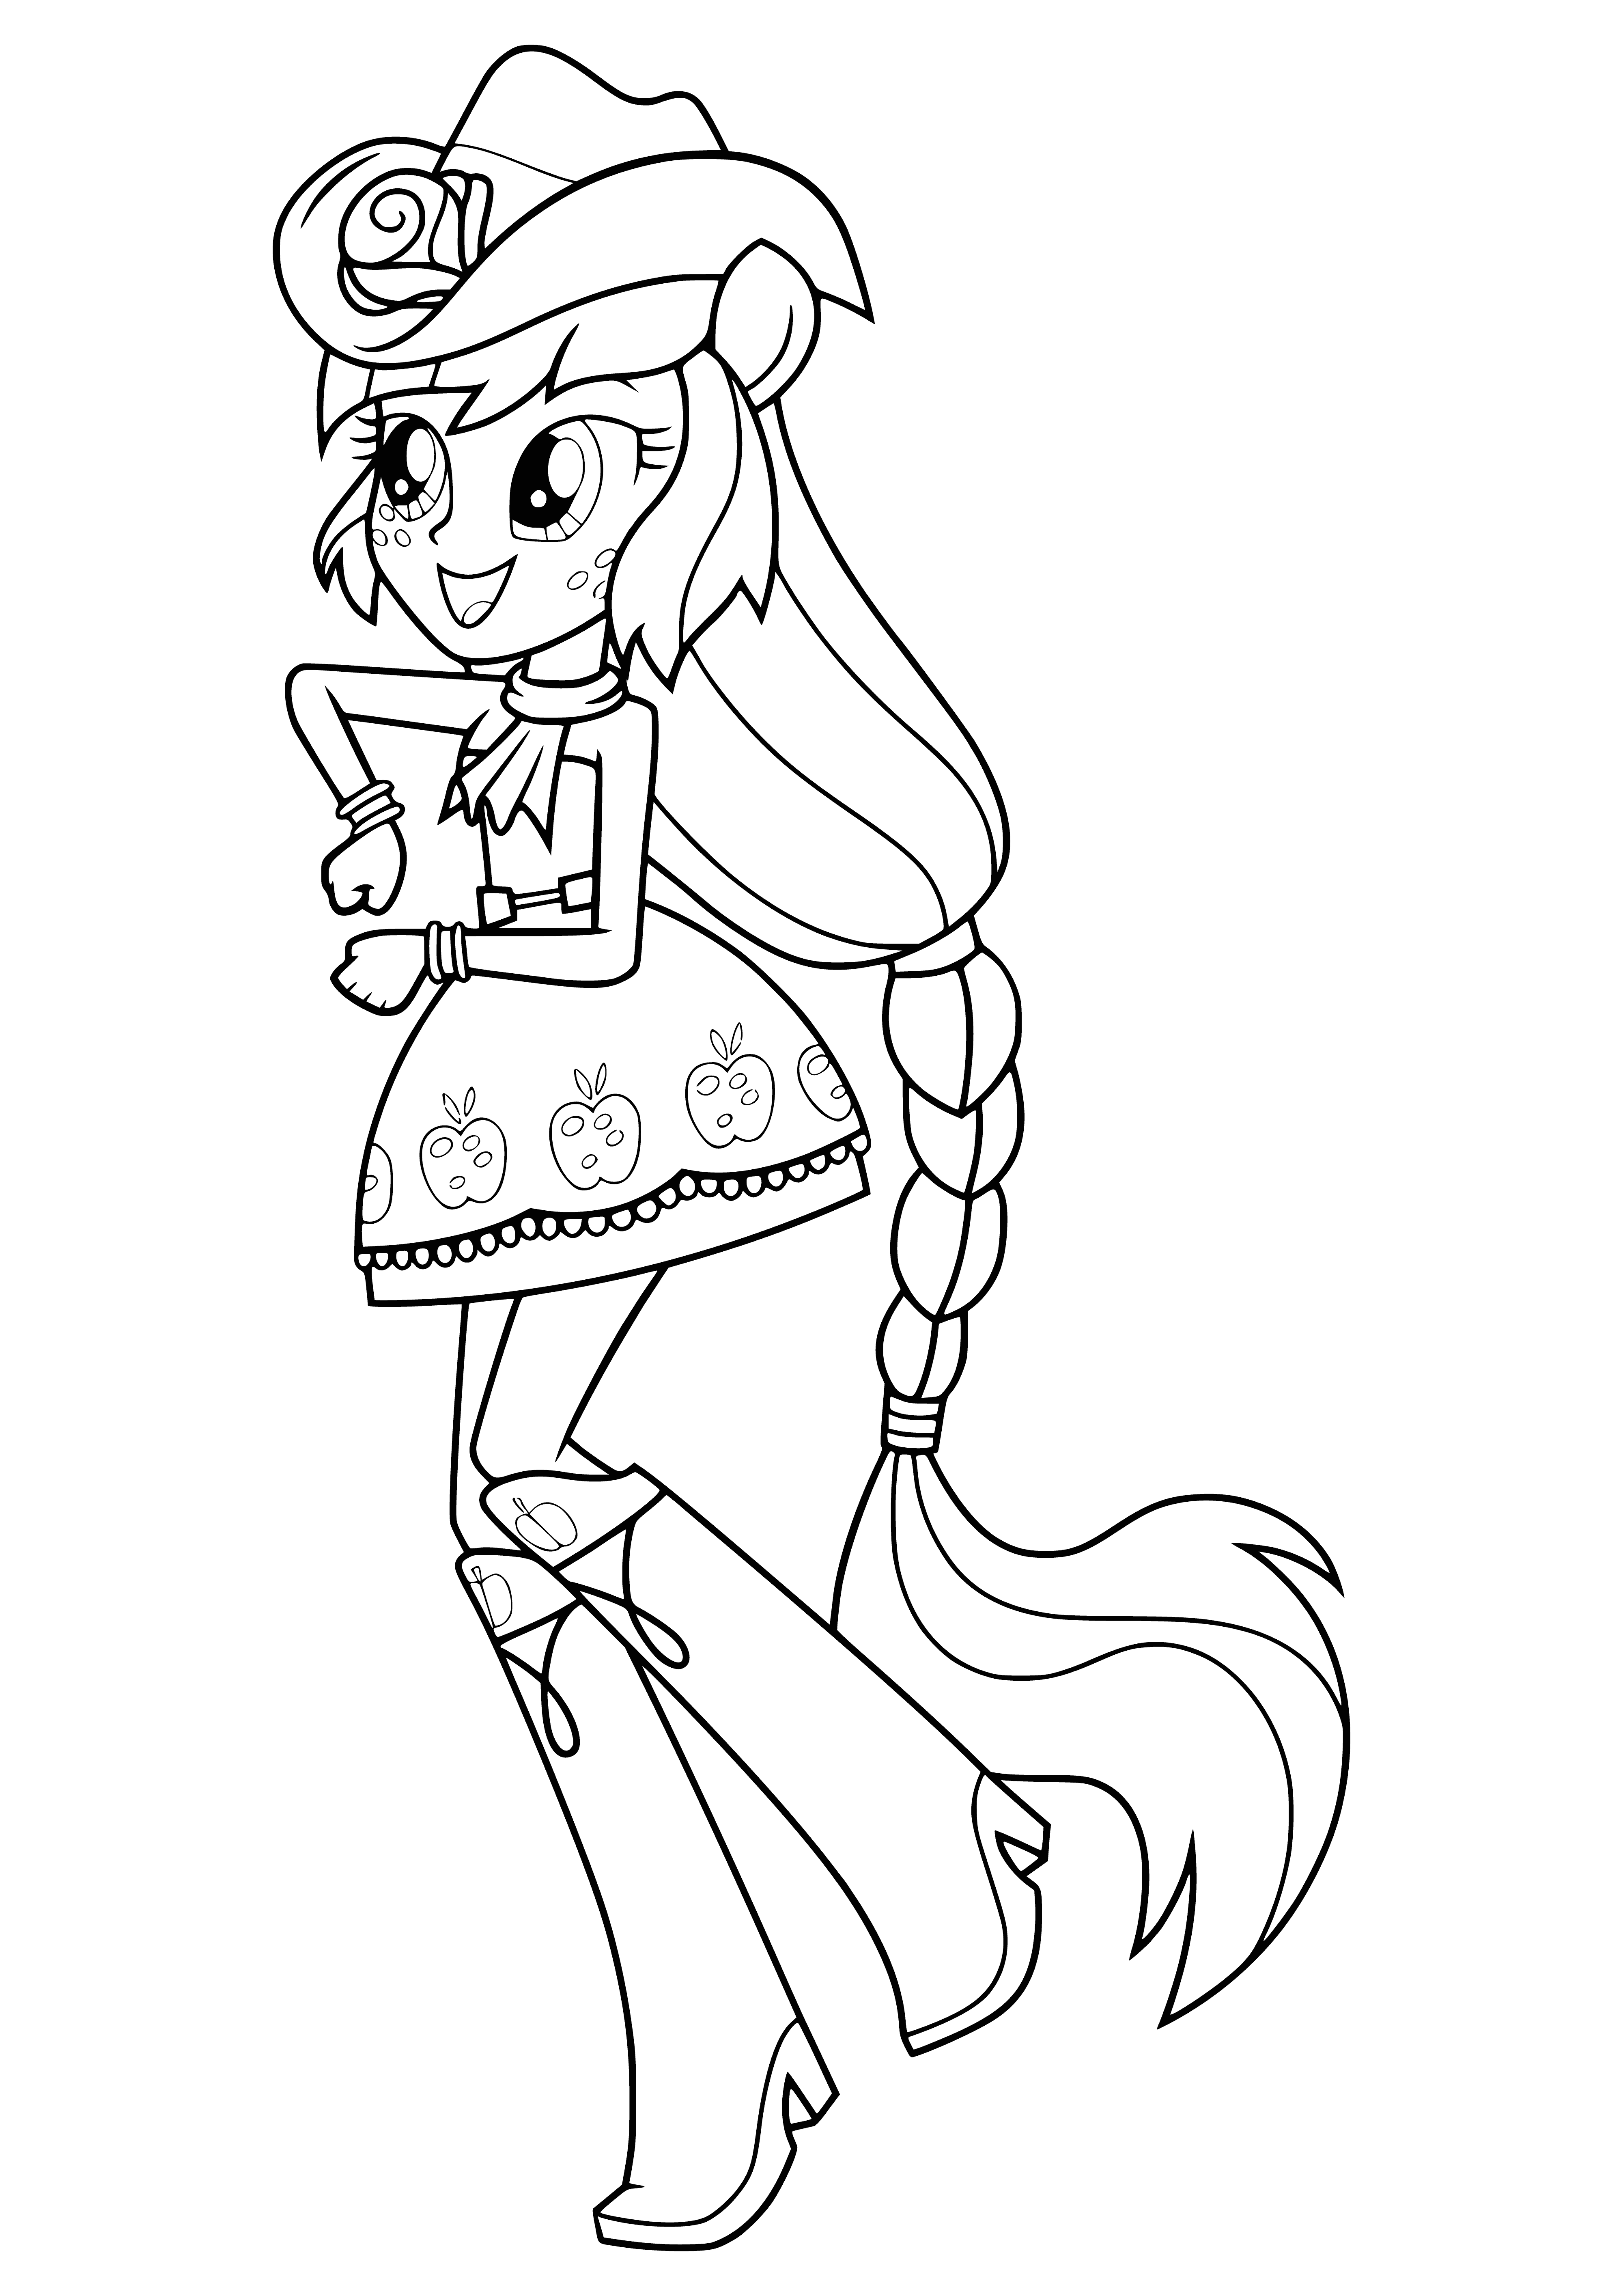 coloring page: Girl with bright orange hair in cowboy outfit, holds an apple and has rope coiled around arm. Wears hat w/ pink ribbon & silver belt buckle w/ horseshoe.